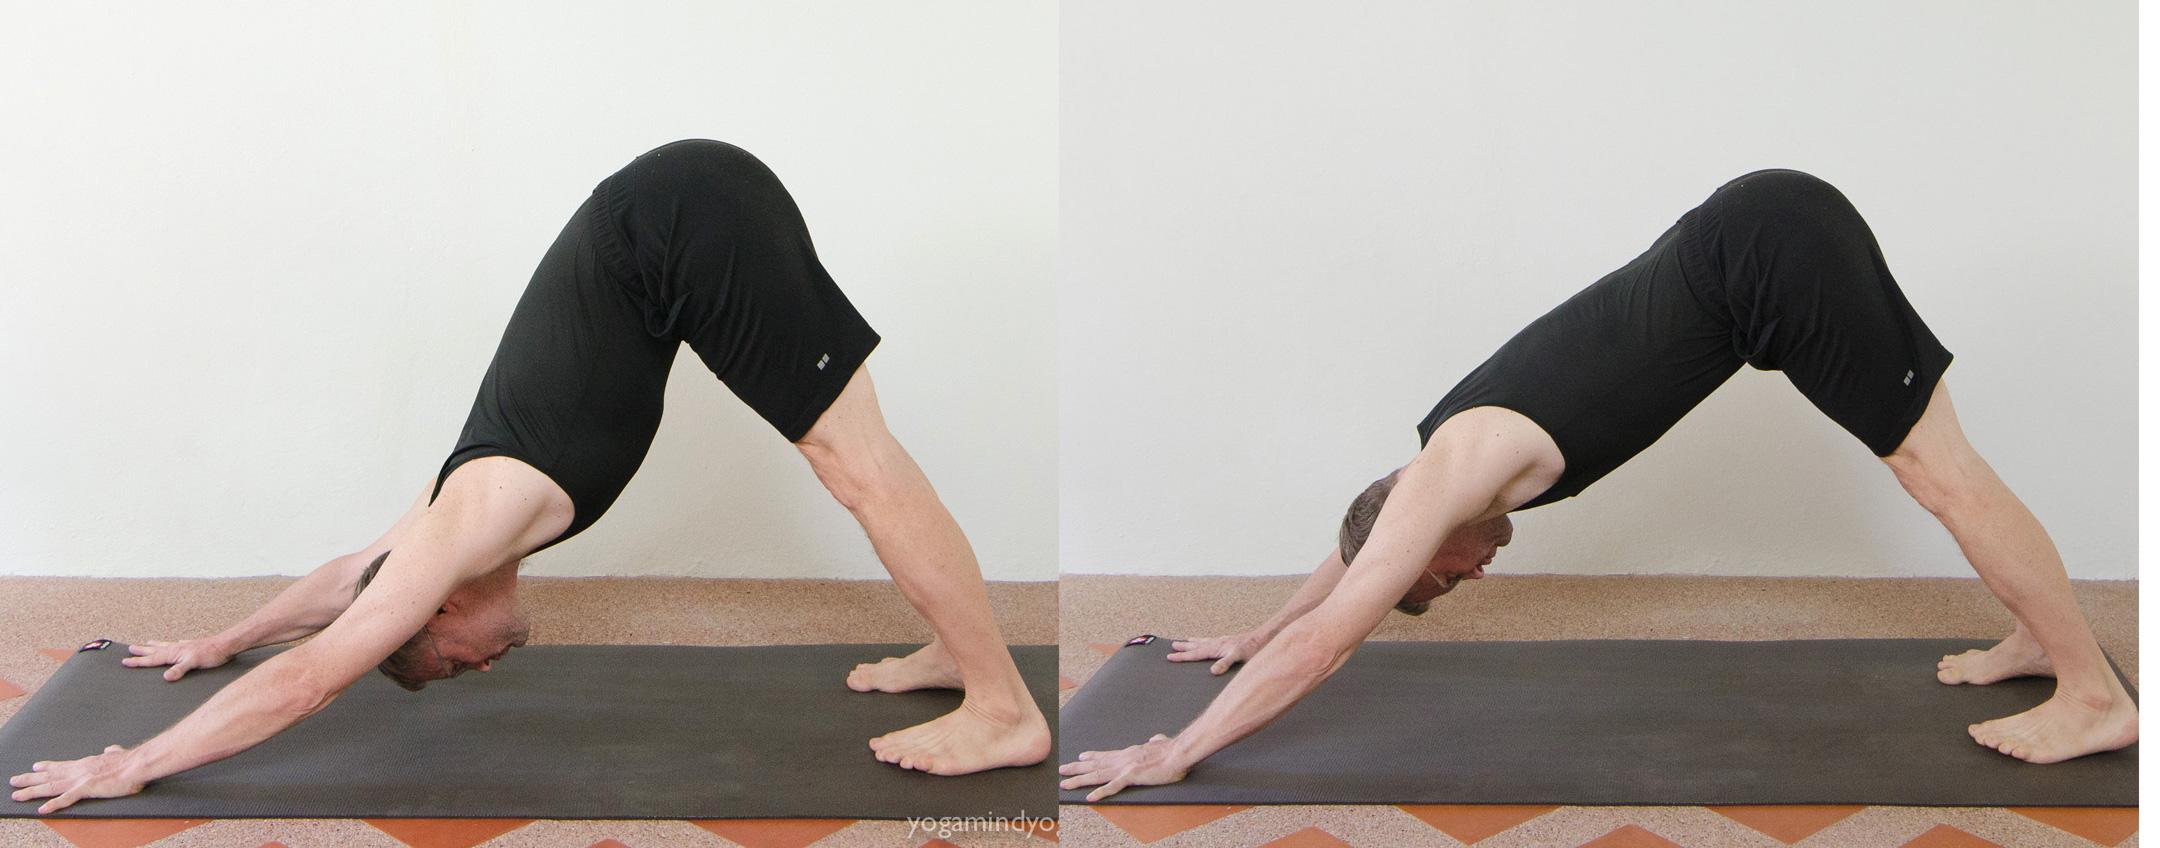 Dive into the Best One-Leg Yoga Poses for Strength! - The Yoga Nomads